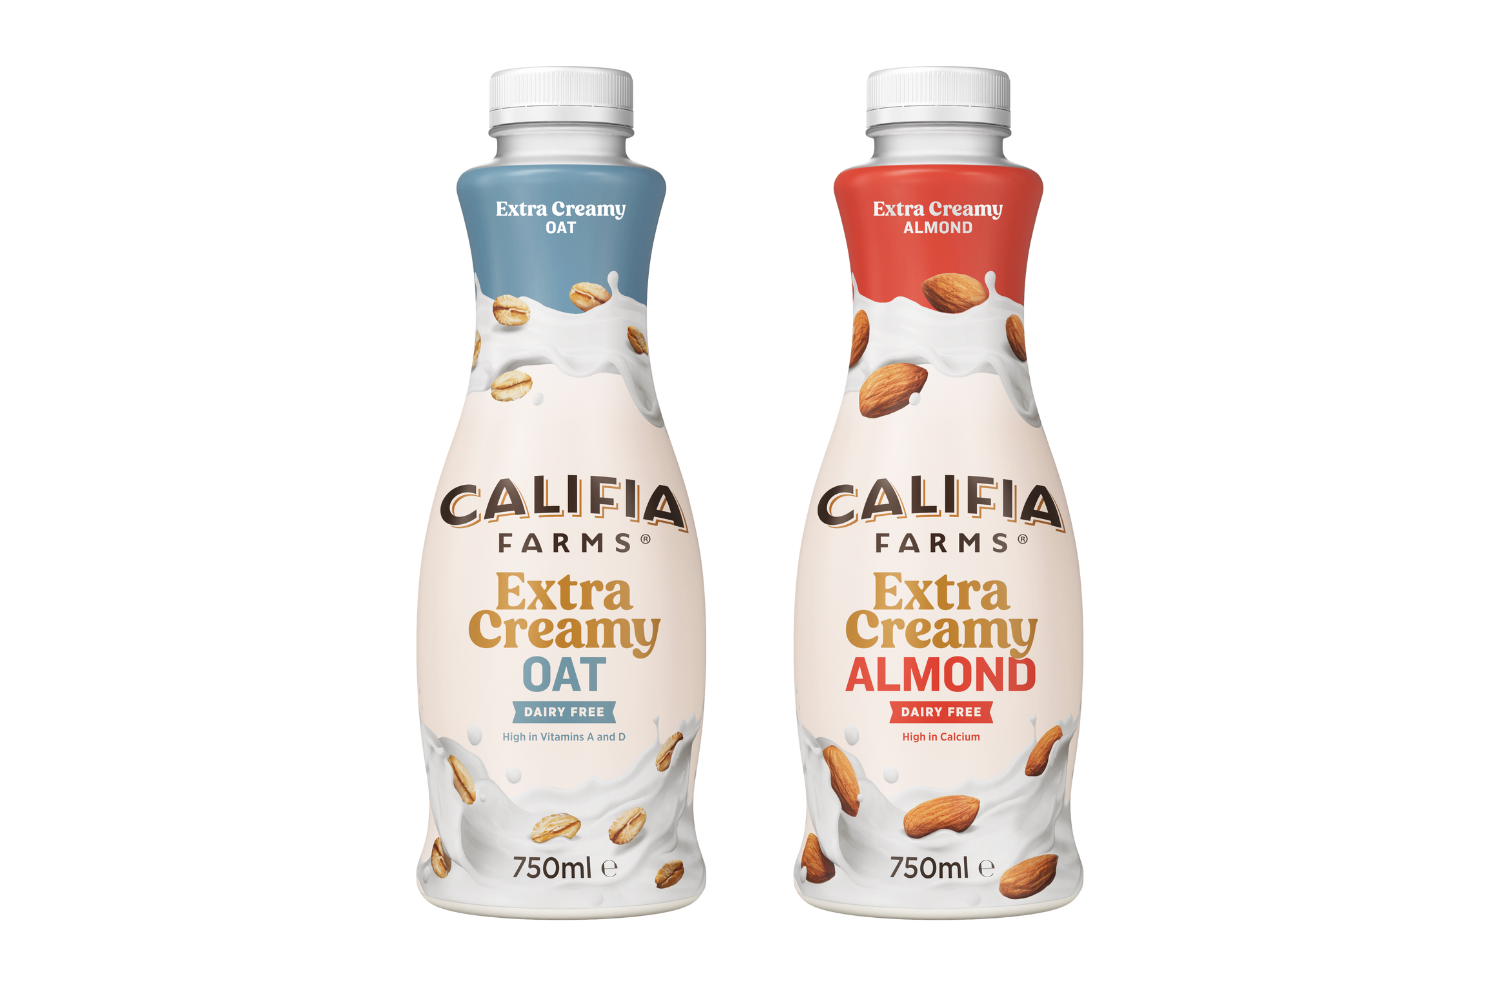 Two bottles of Califia Farms Extra Creamy